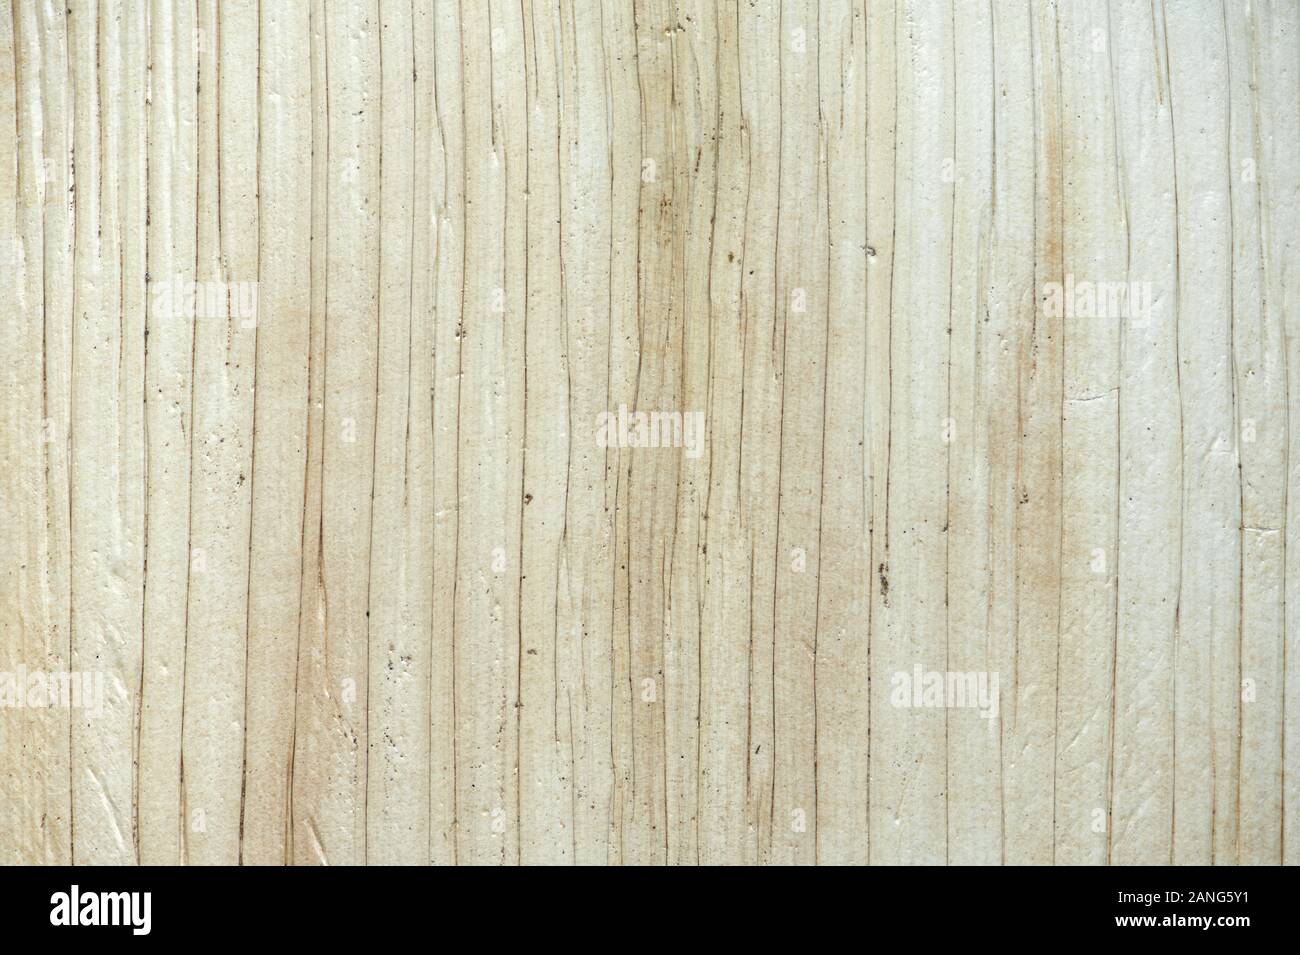 Texture of a disposable, single use palm leaf plate. Natural product, biodegradable and plastic free, earth friendly. Go green concept background. Stock Photo